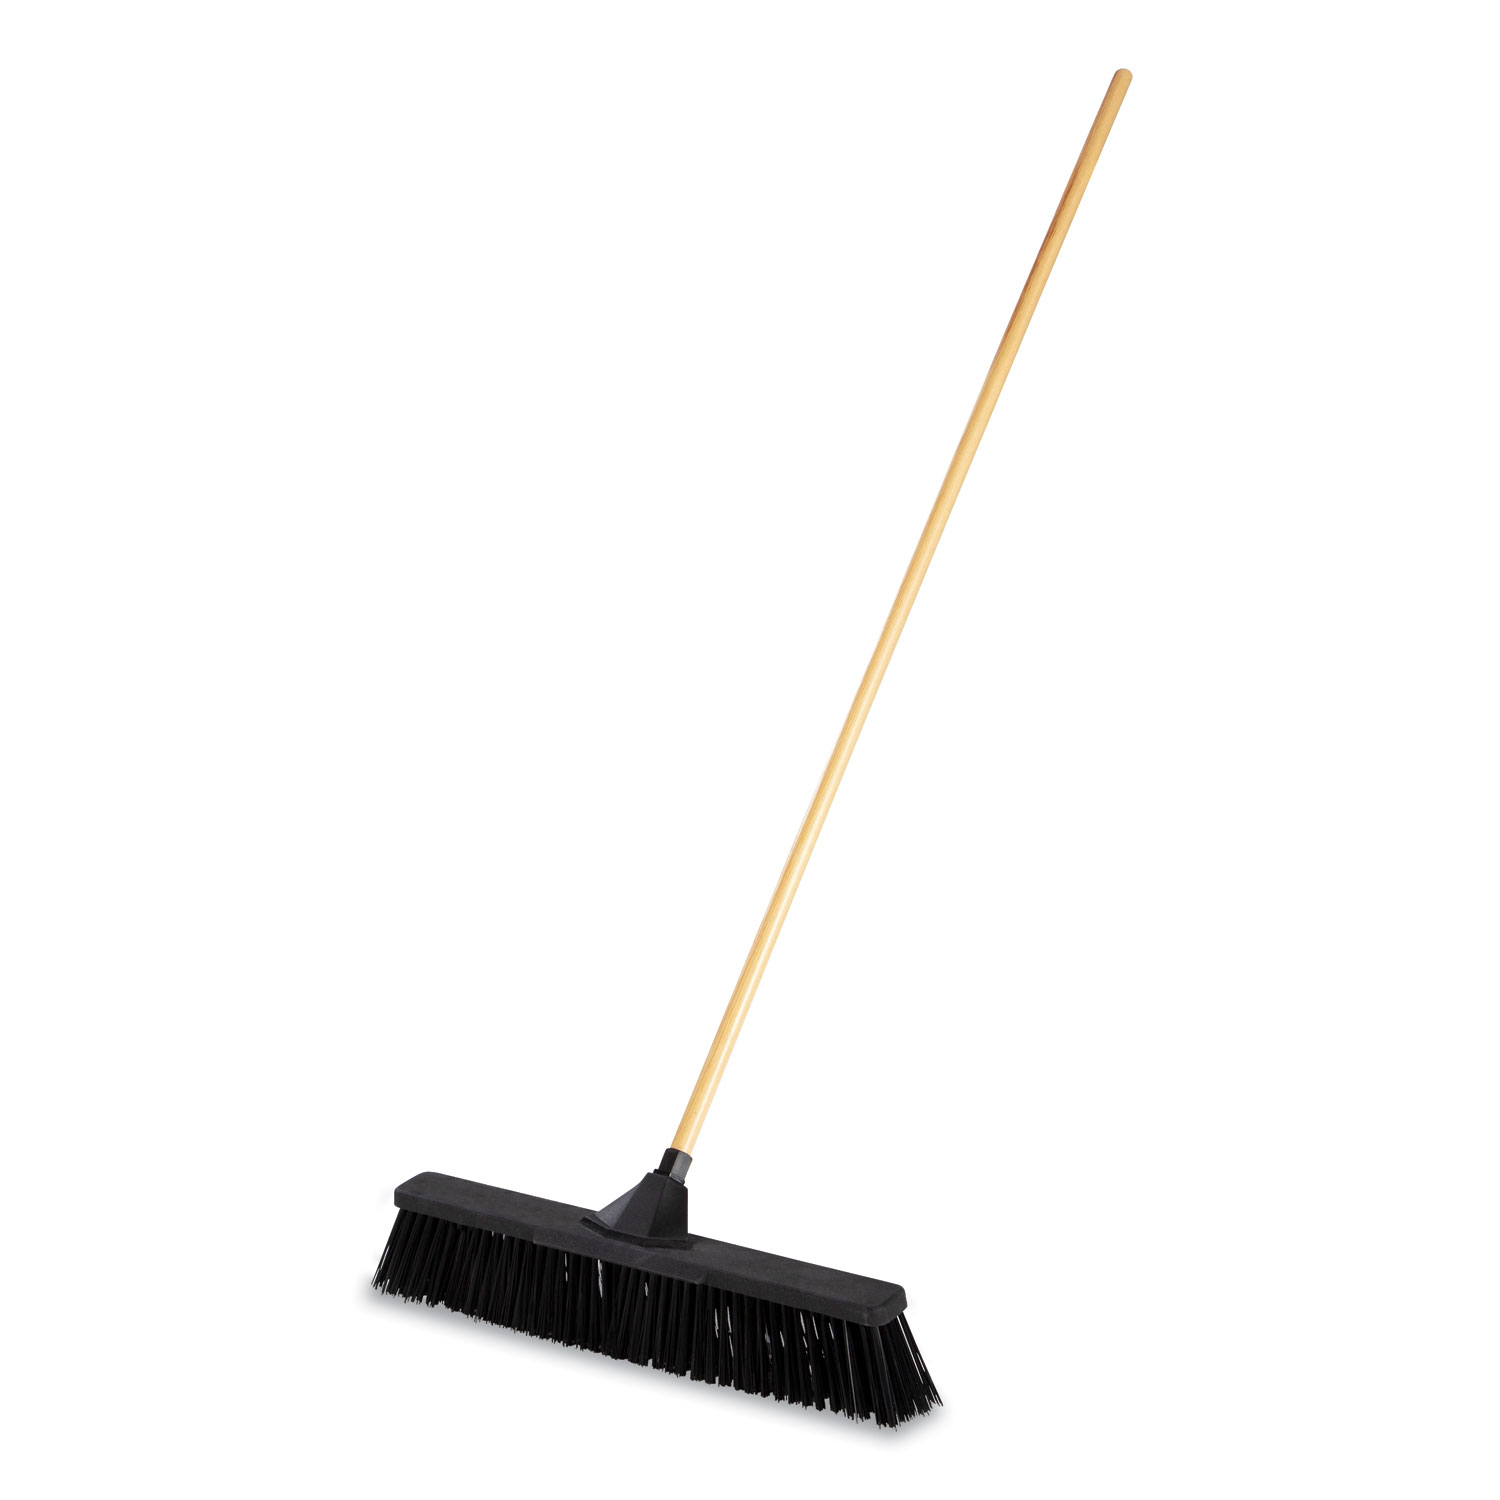  Rubbermaid Commercial 2040050 Push Brooms, 24 Brush, PP Bristles, For Rough Floor Surfaces, 62 Wood Handle, Black (RCP2040050) 